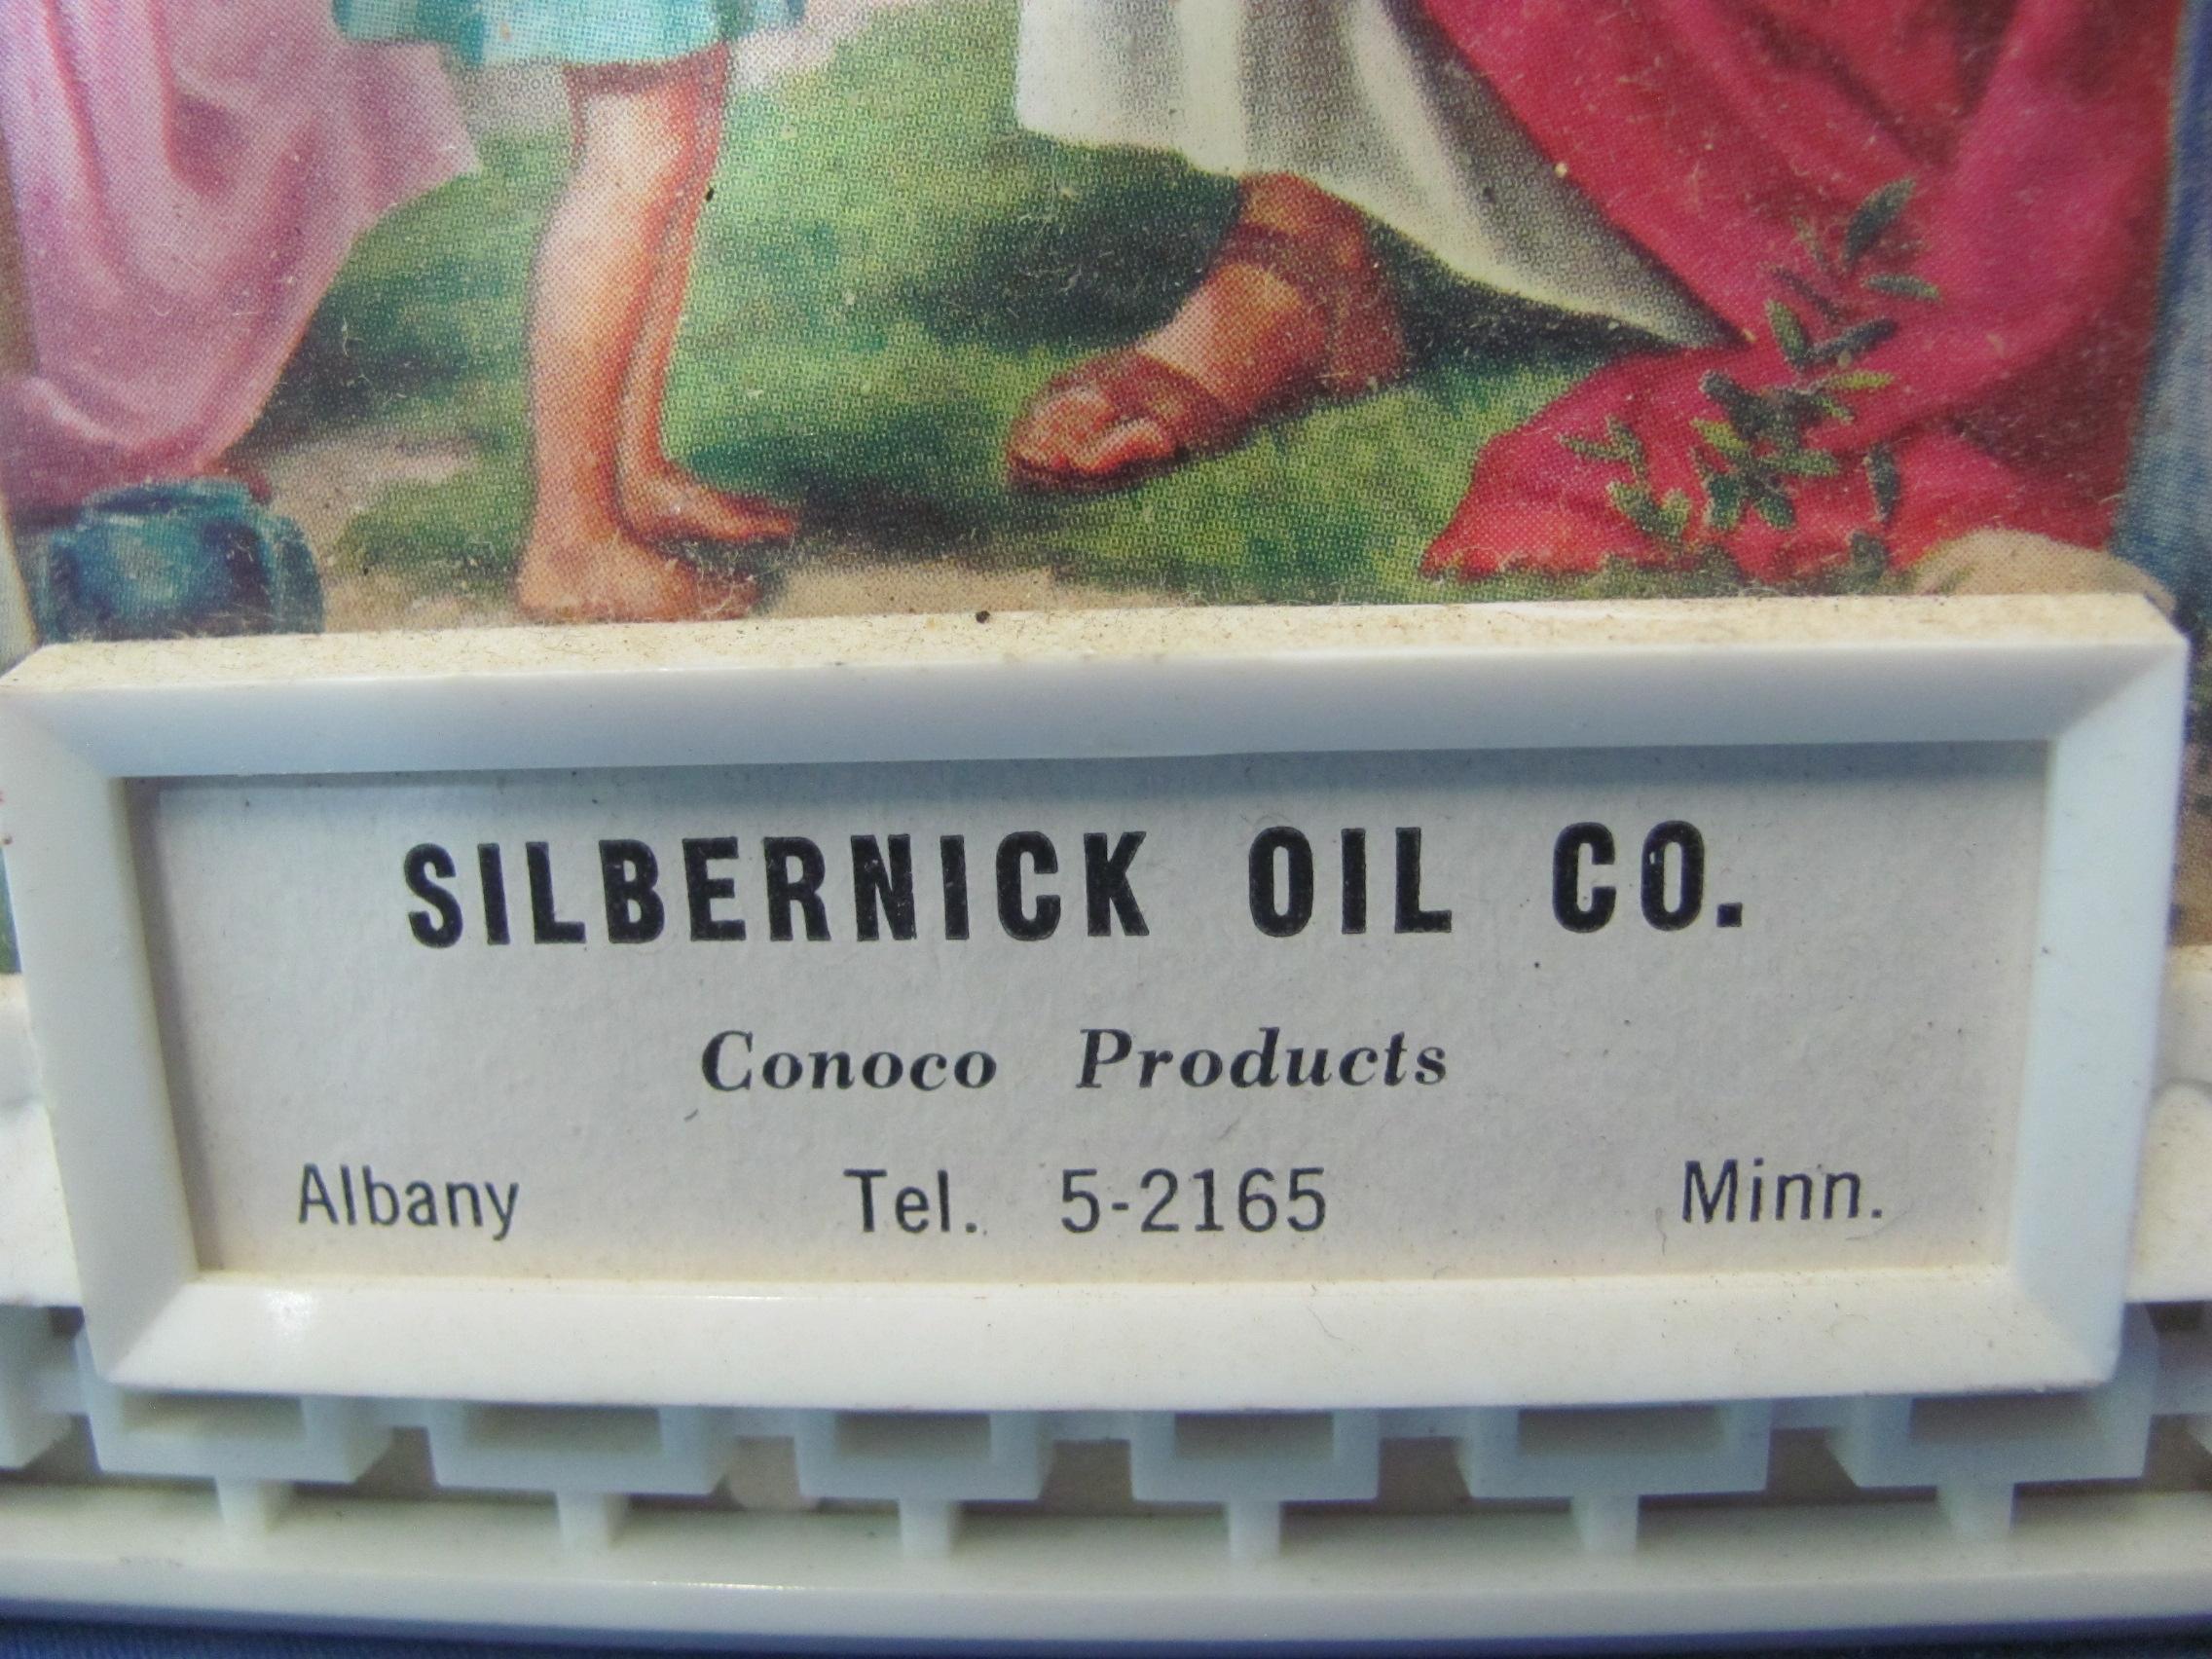 2 Vintage Advertising Pictures w/ Thermometers -Calendar on Back – John Peterson, Silbernick Oil Co.